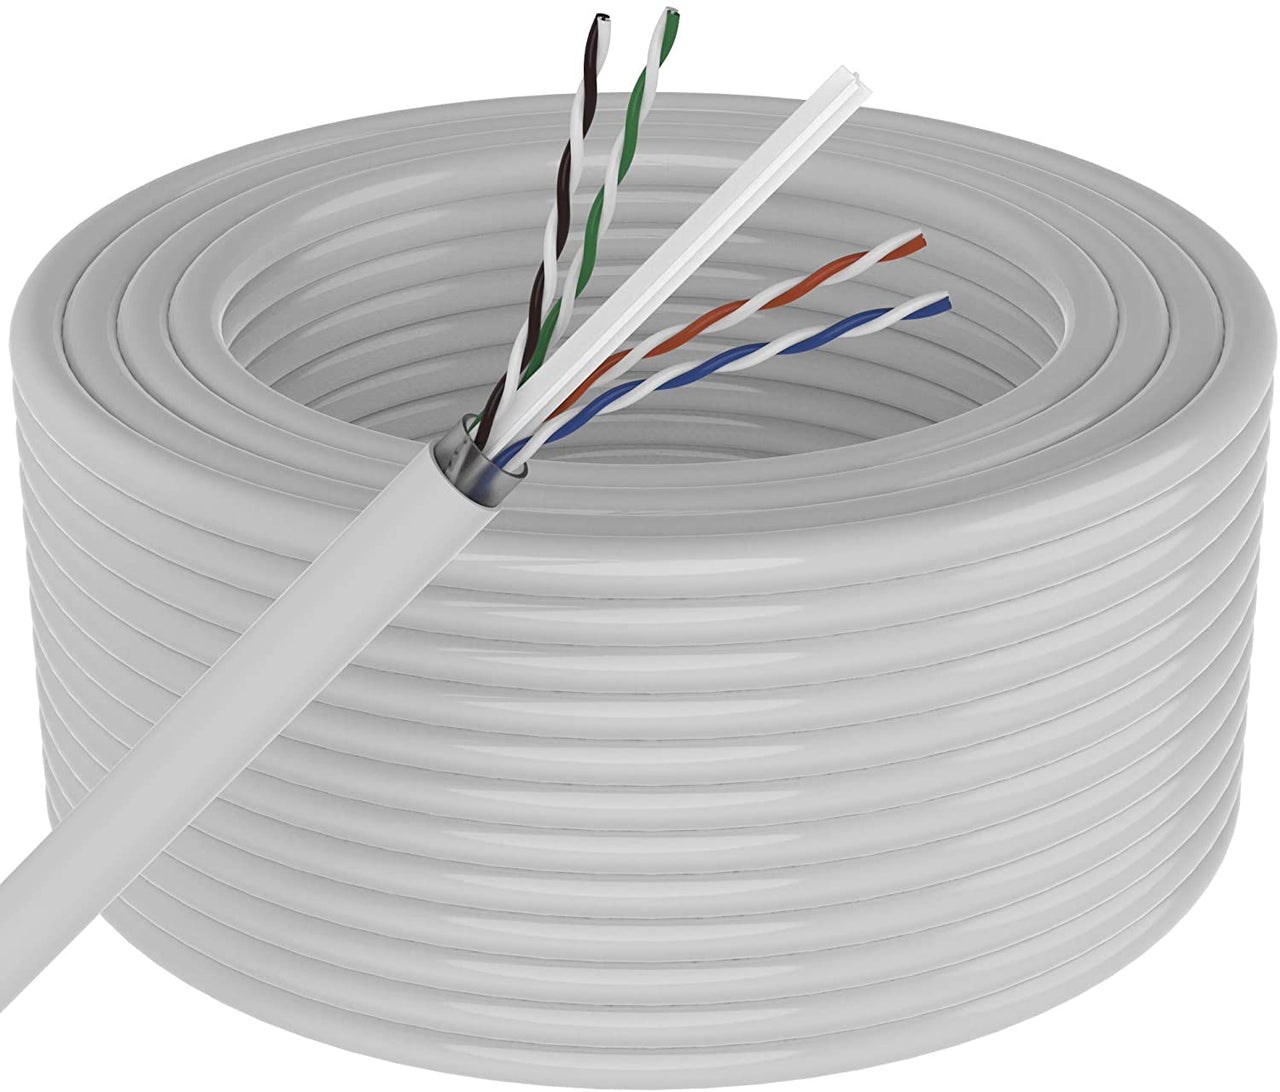 Absolute 1000' Cat6 Ethernet White Bulk Network Cable<br/> 23AWG 600Mhz UL Bare Solid Copper Wire UTP 1000' White